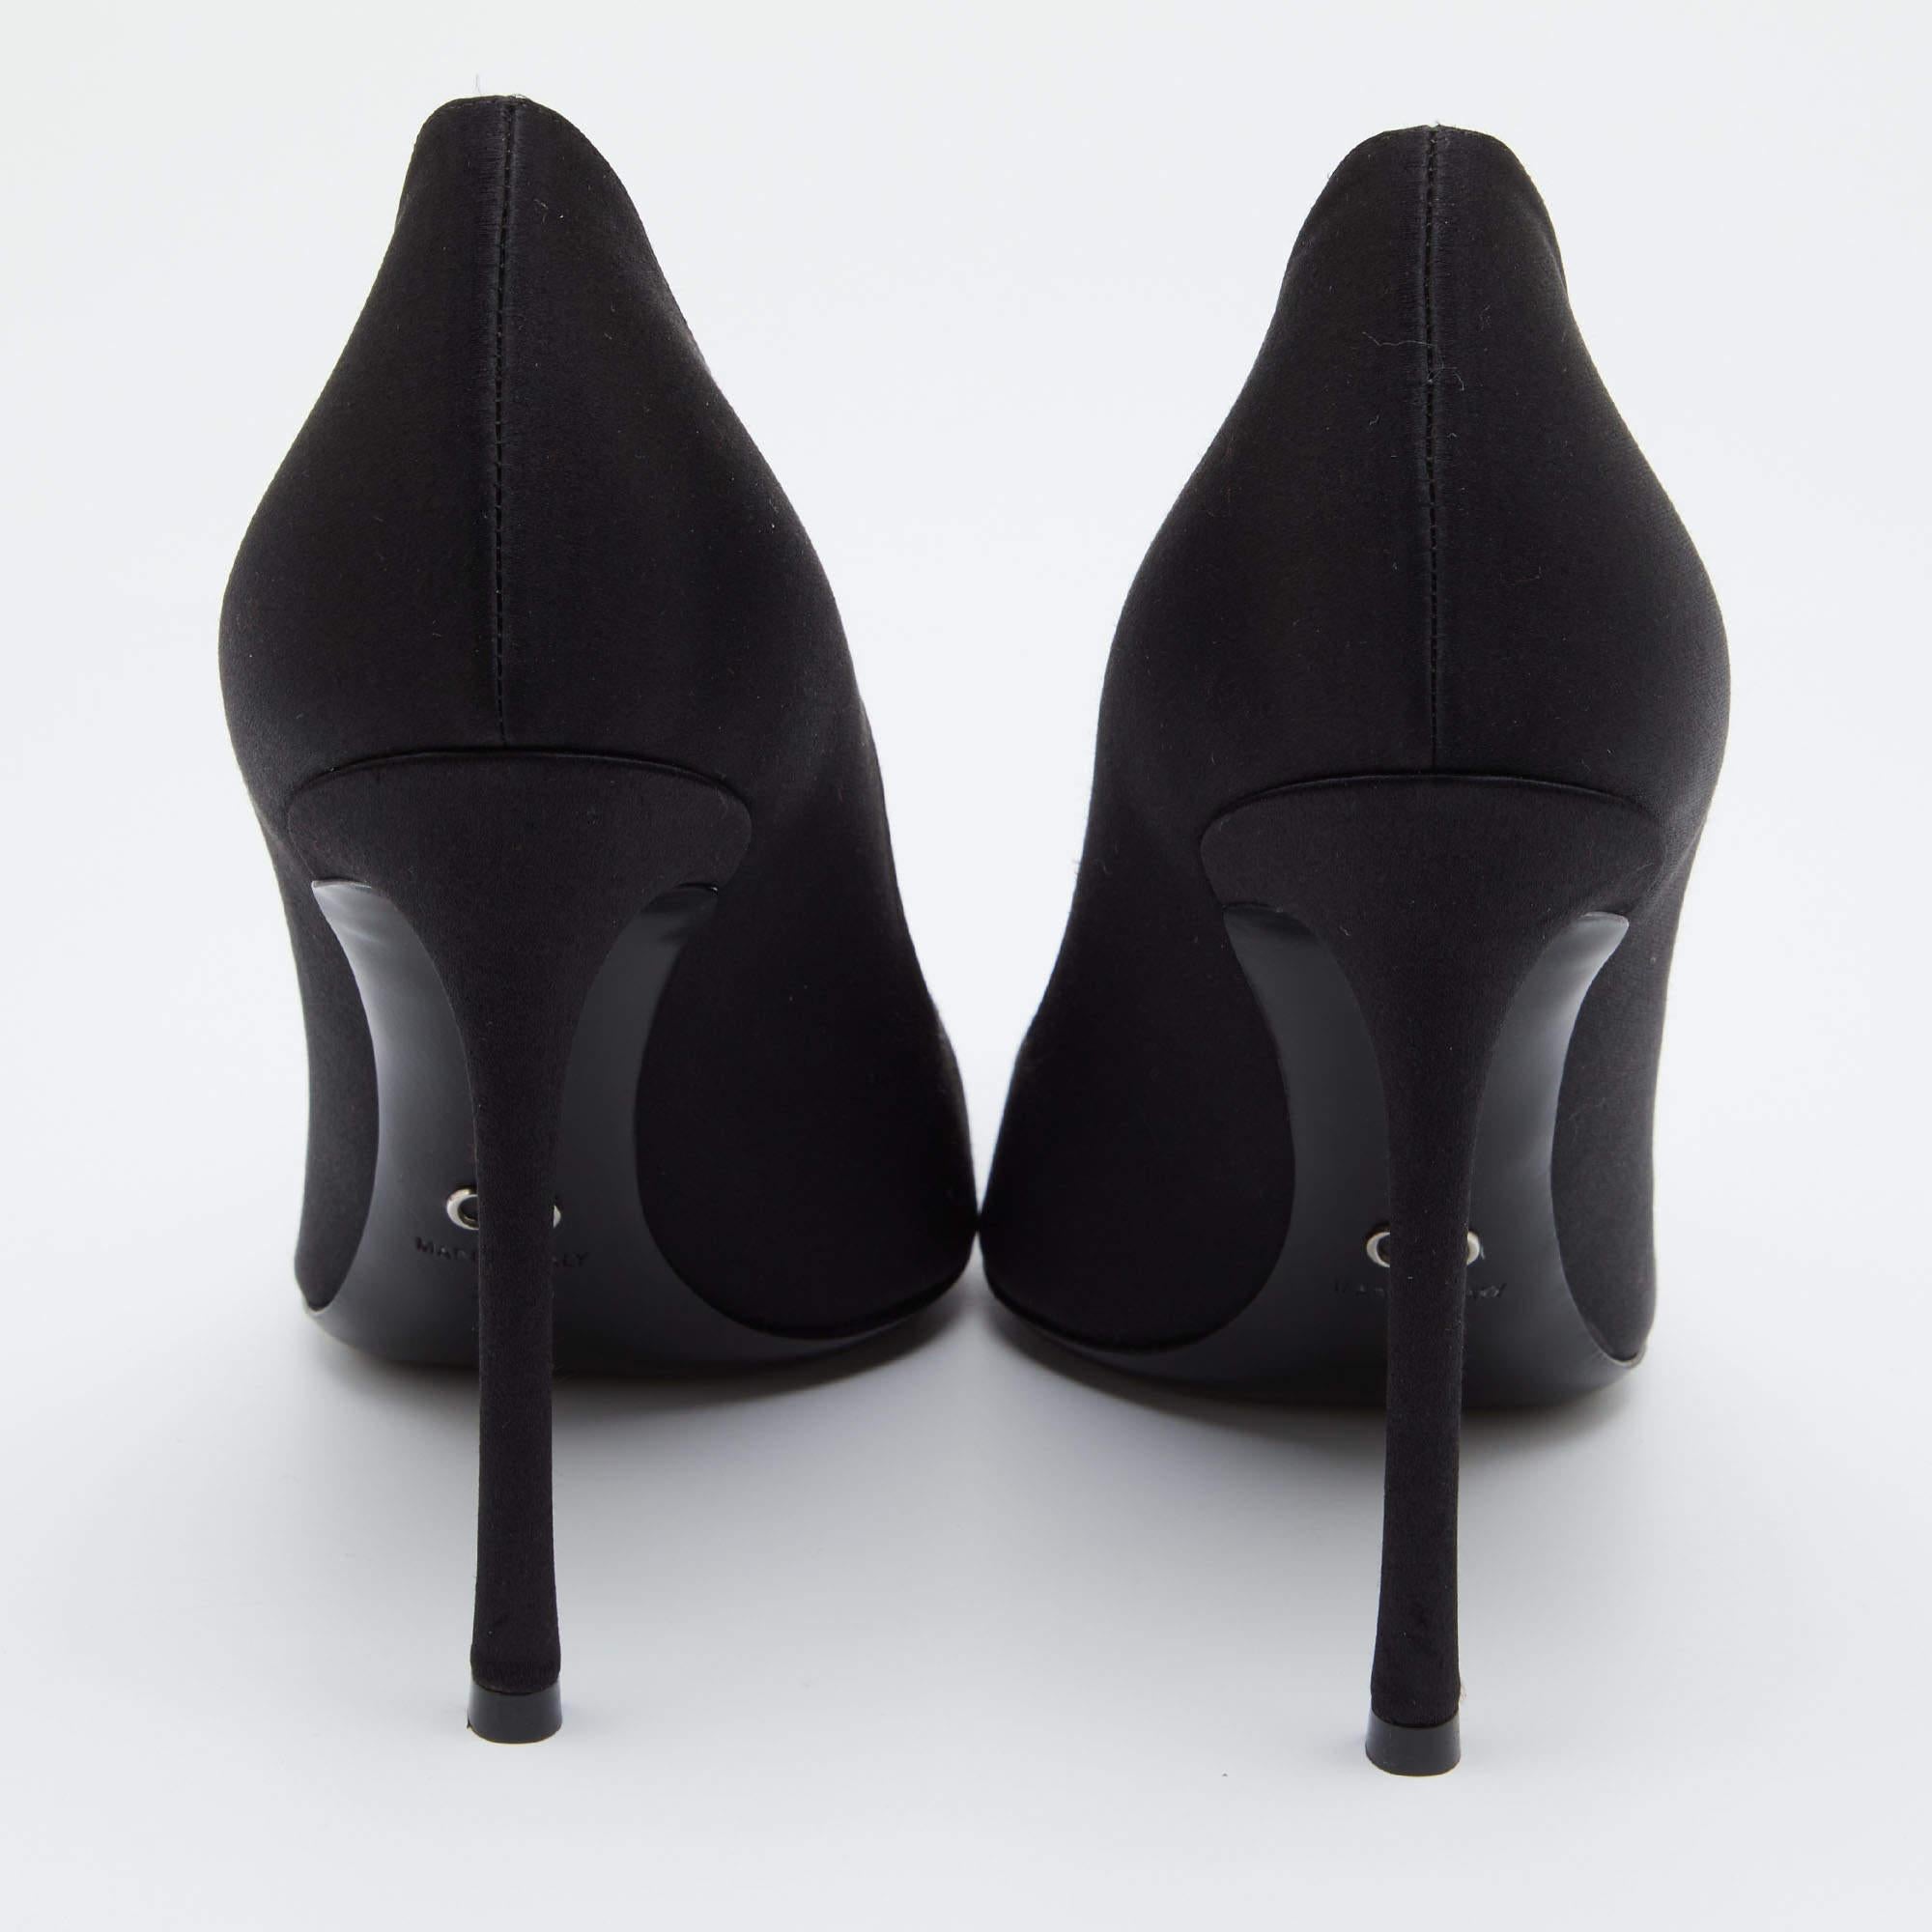 Exhibit an elegant style with this pair of pumps. These designer pumps are crafted from quality materials. They are set on durable soles and high heels.

